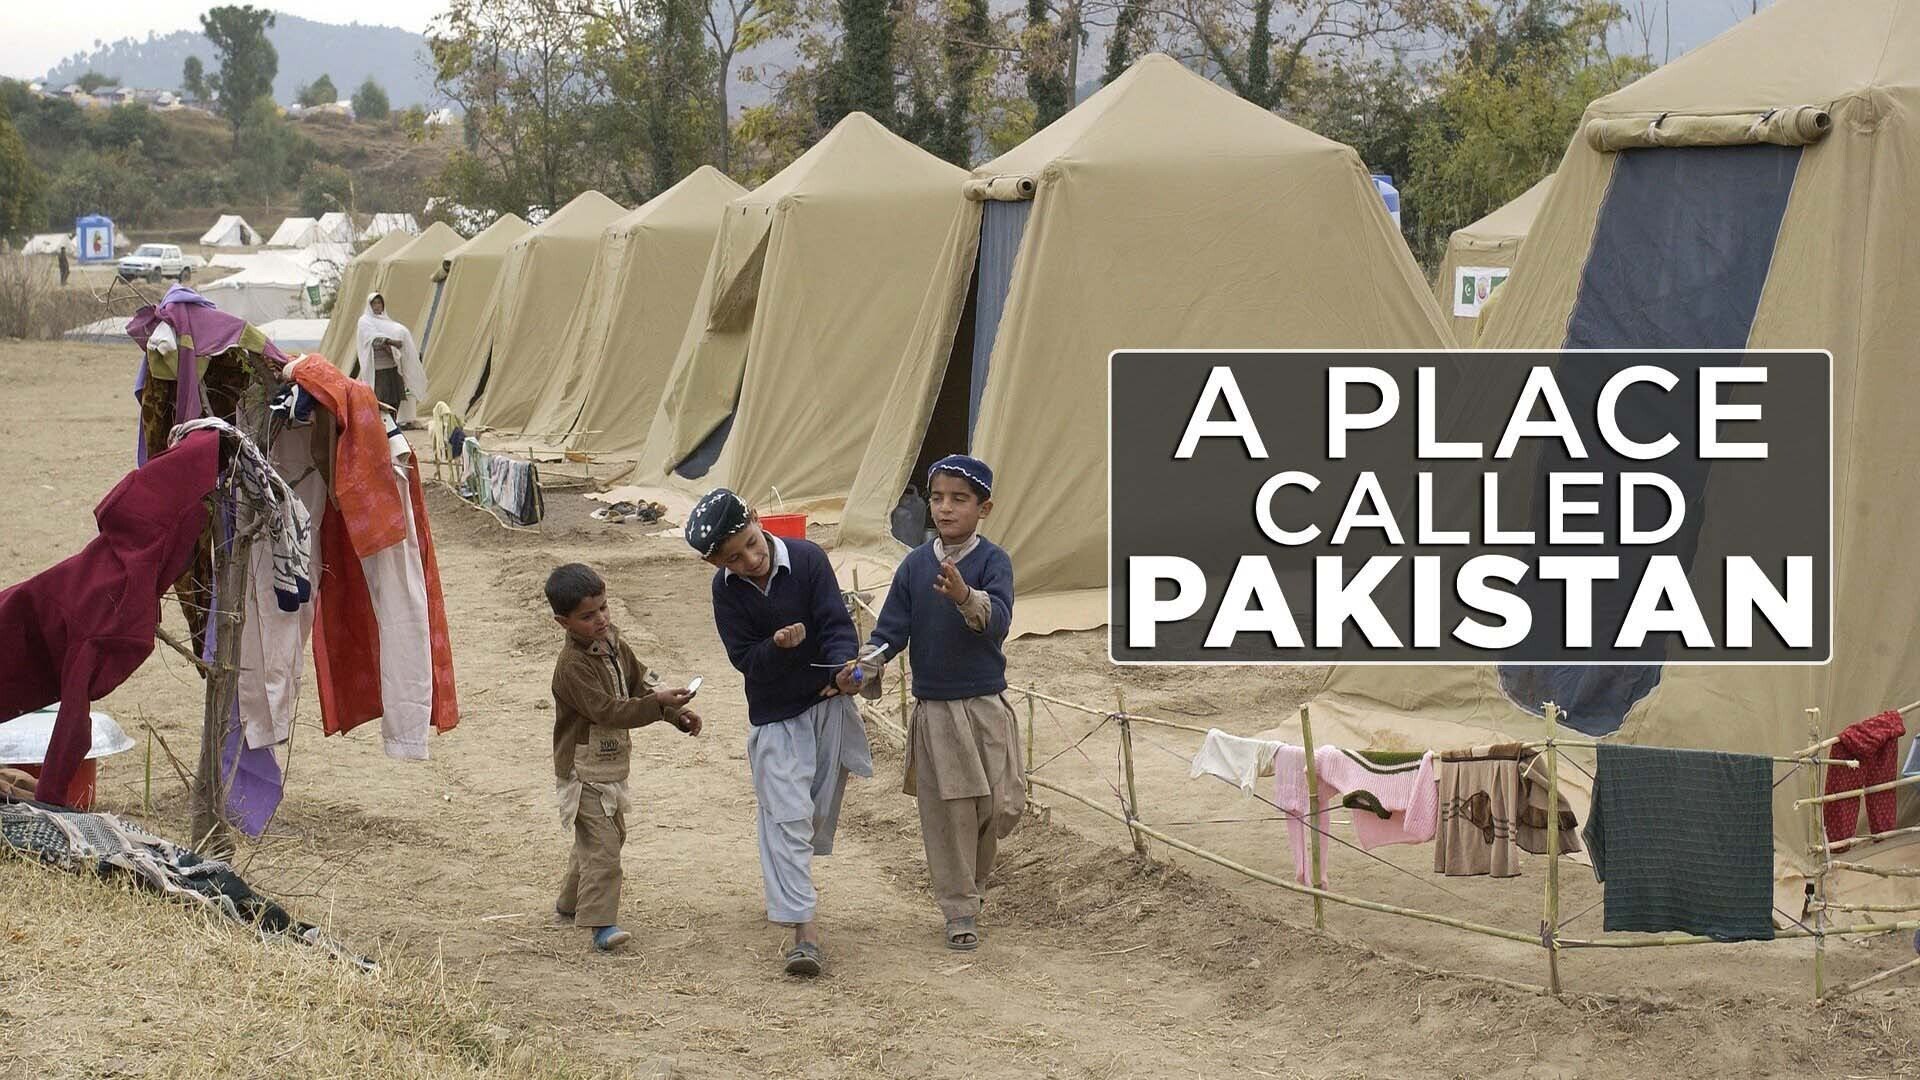 A Place Called Pakistan